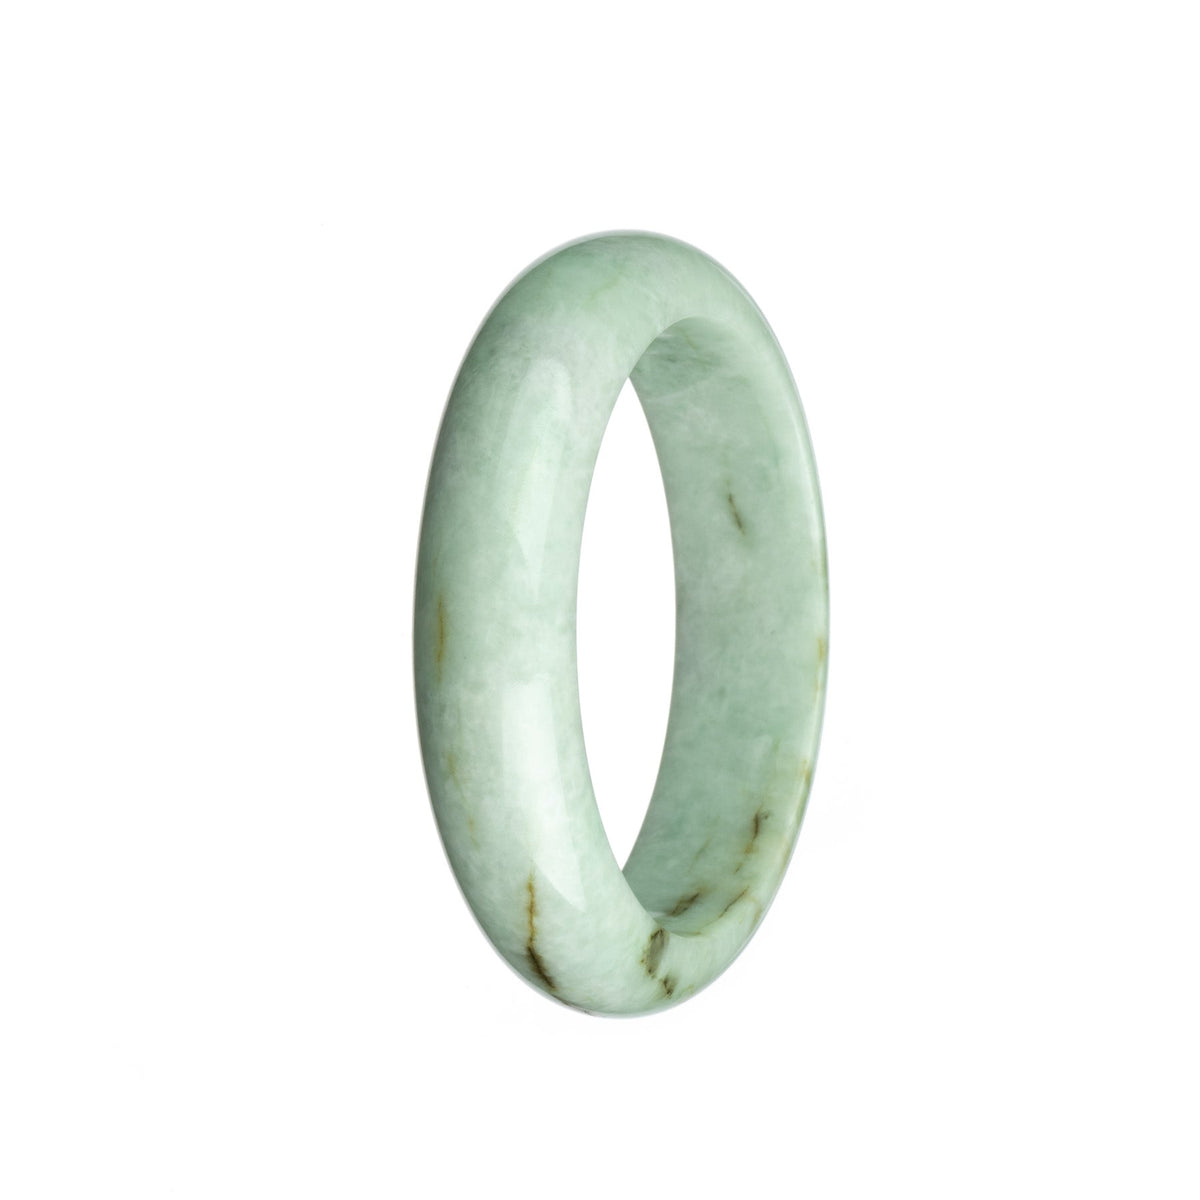 A pale green jadeite jade bangle bracelet featuring a half-moon shape, measuring 57mm in size. This bracelet is certified as Type A jade and is from the MAYS collection.